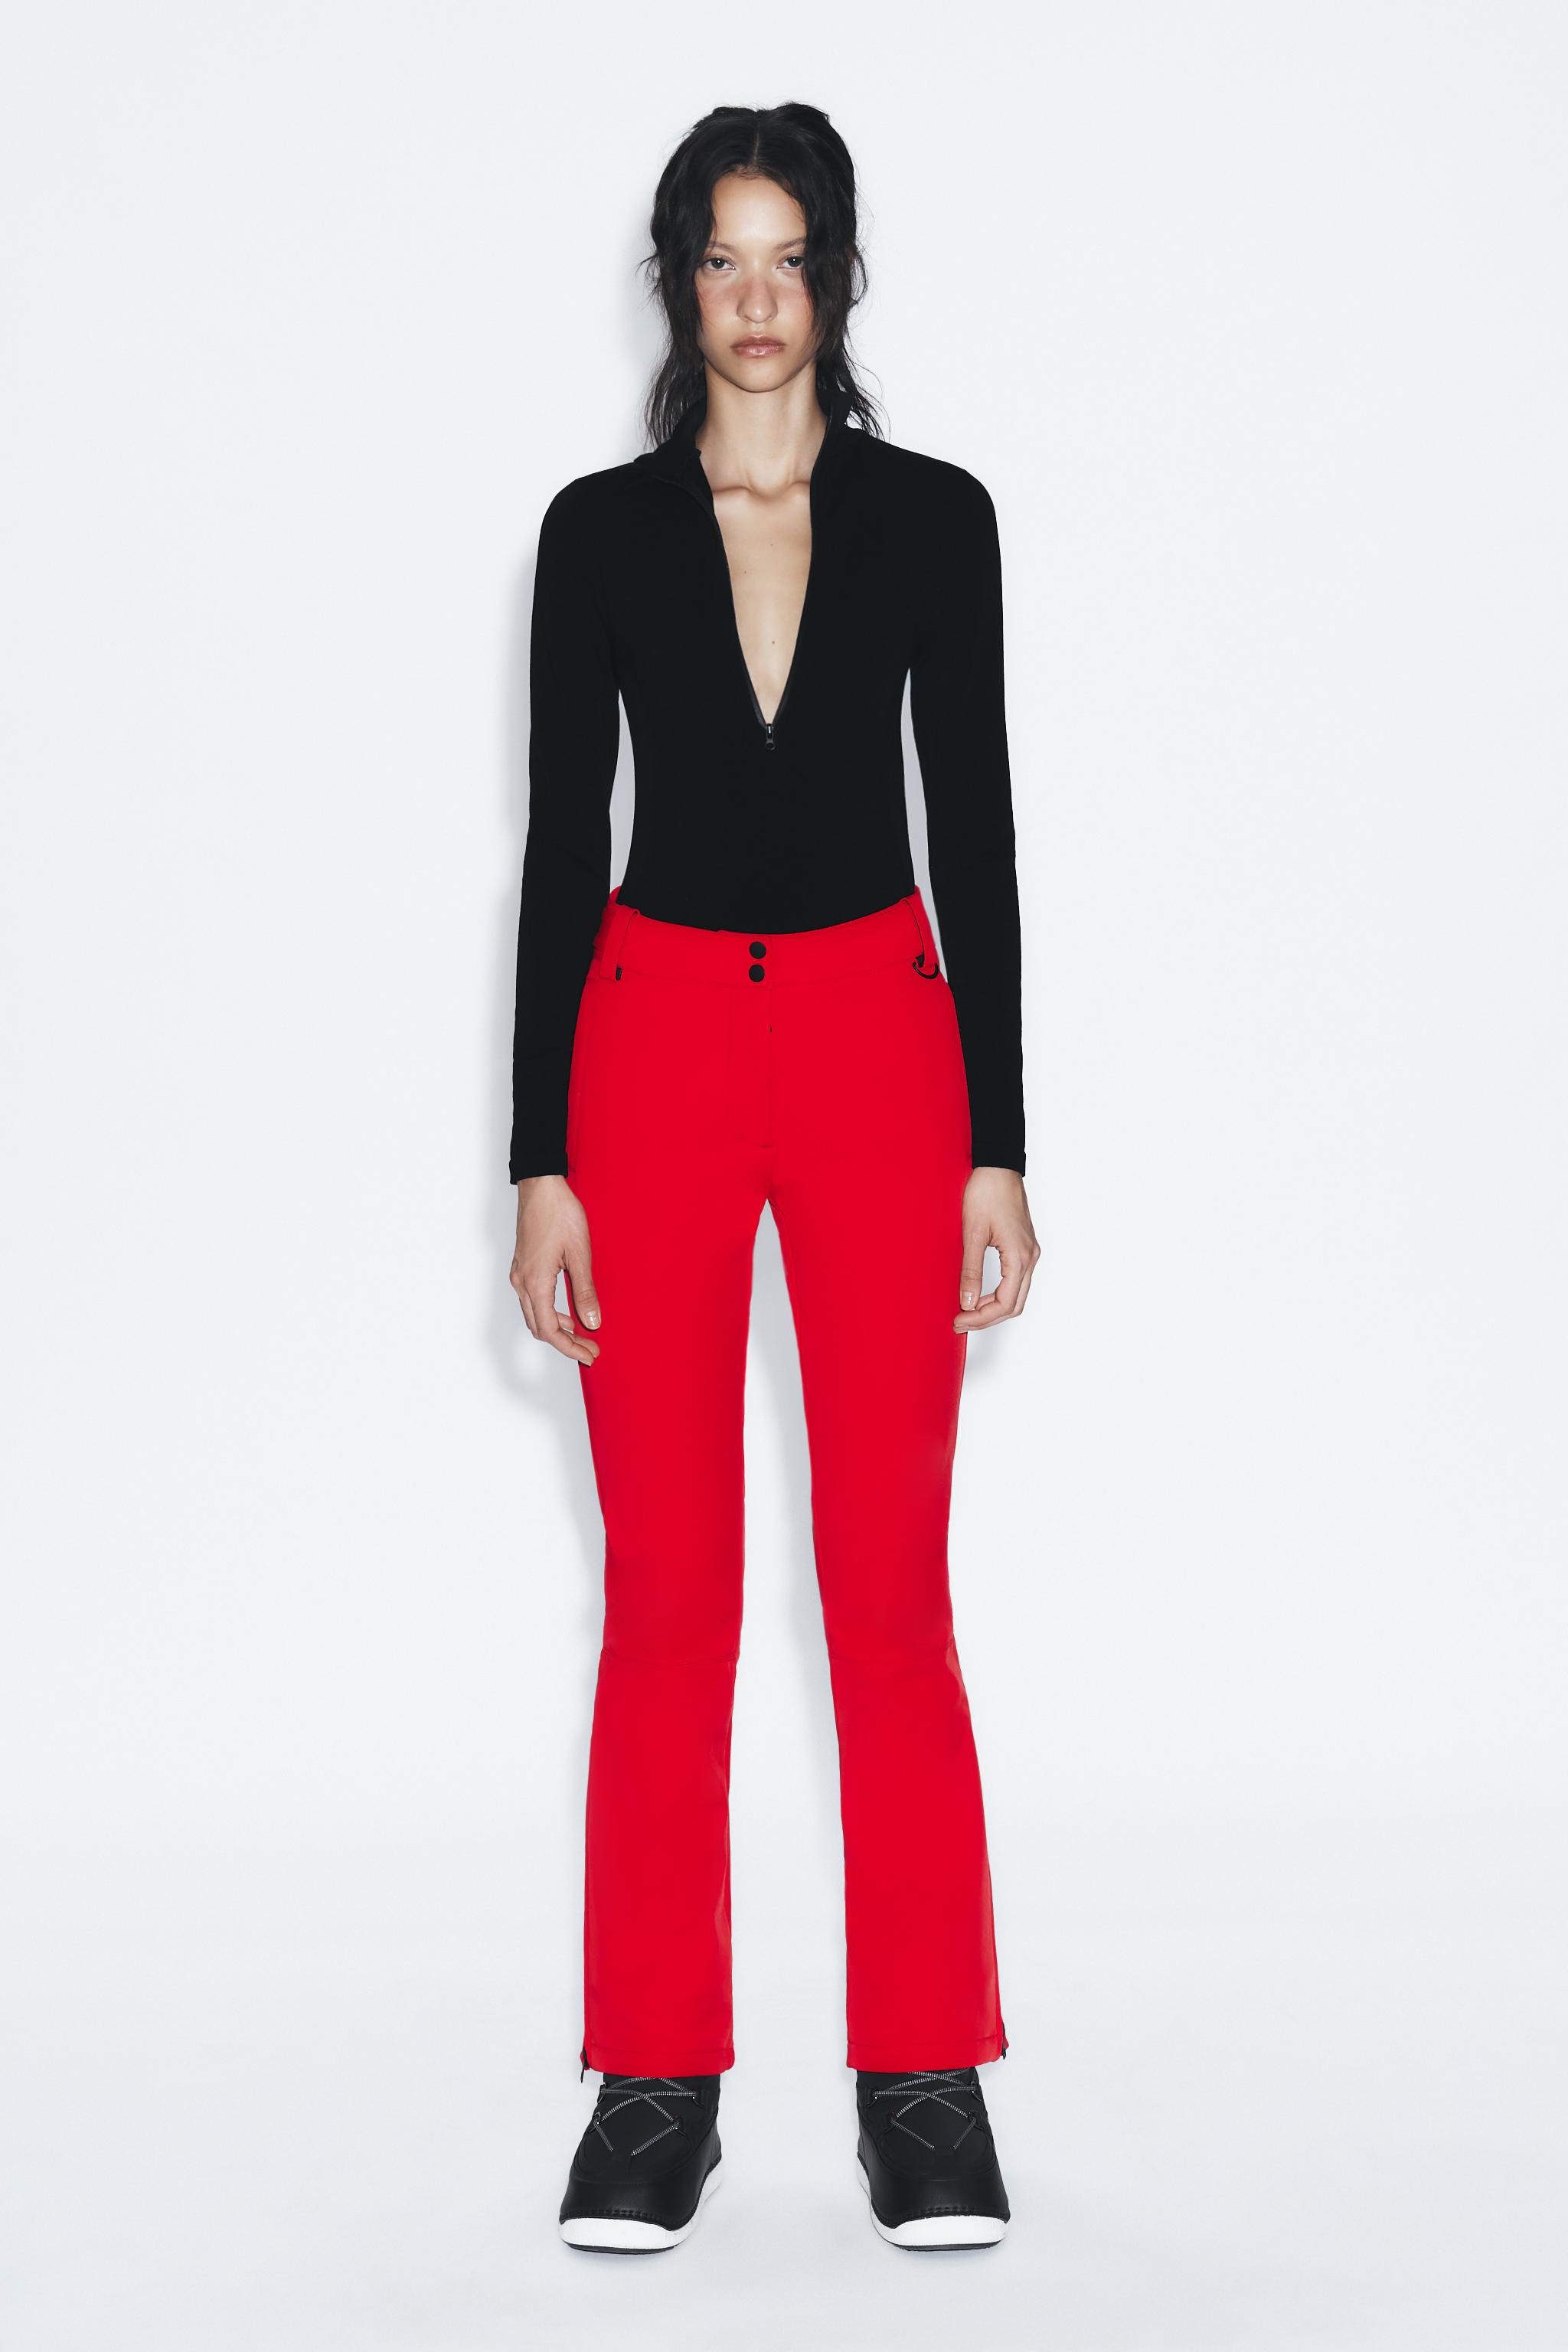 ZARA HIGH WAIST CULOTTE ROT SCHICK RED CROPPED PANTS TROUSERS 2561/778